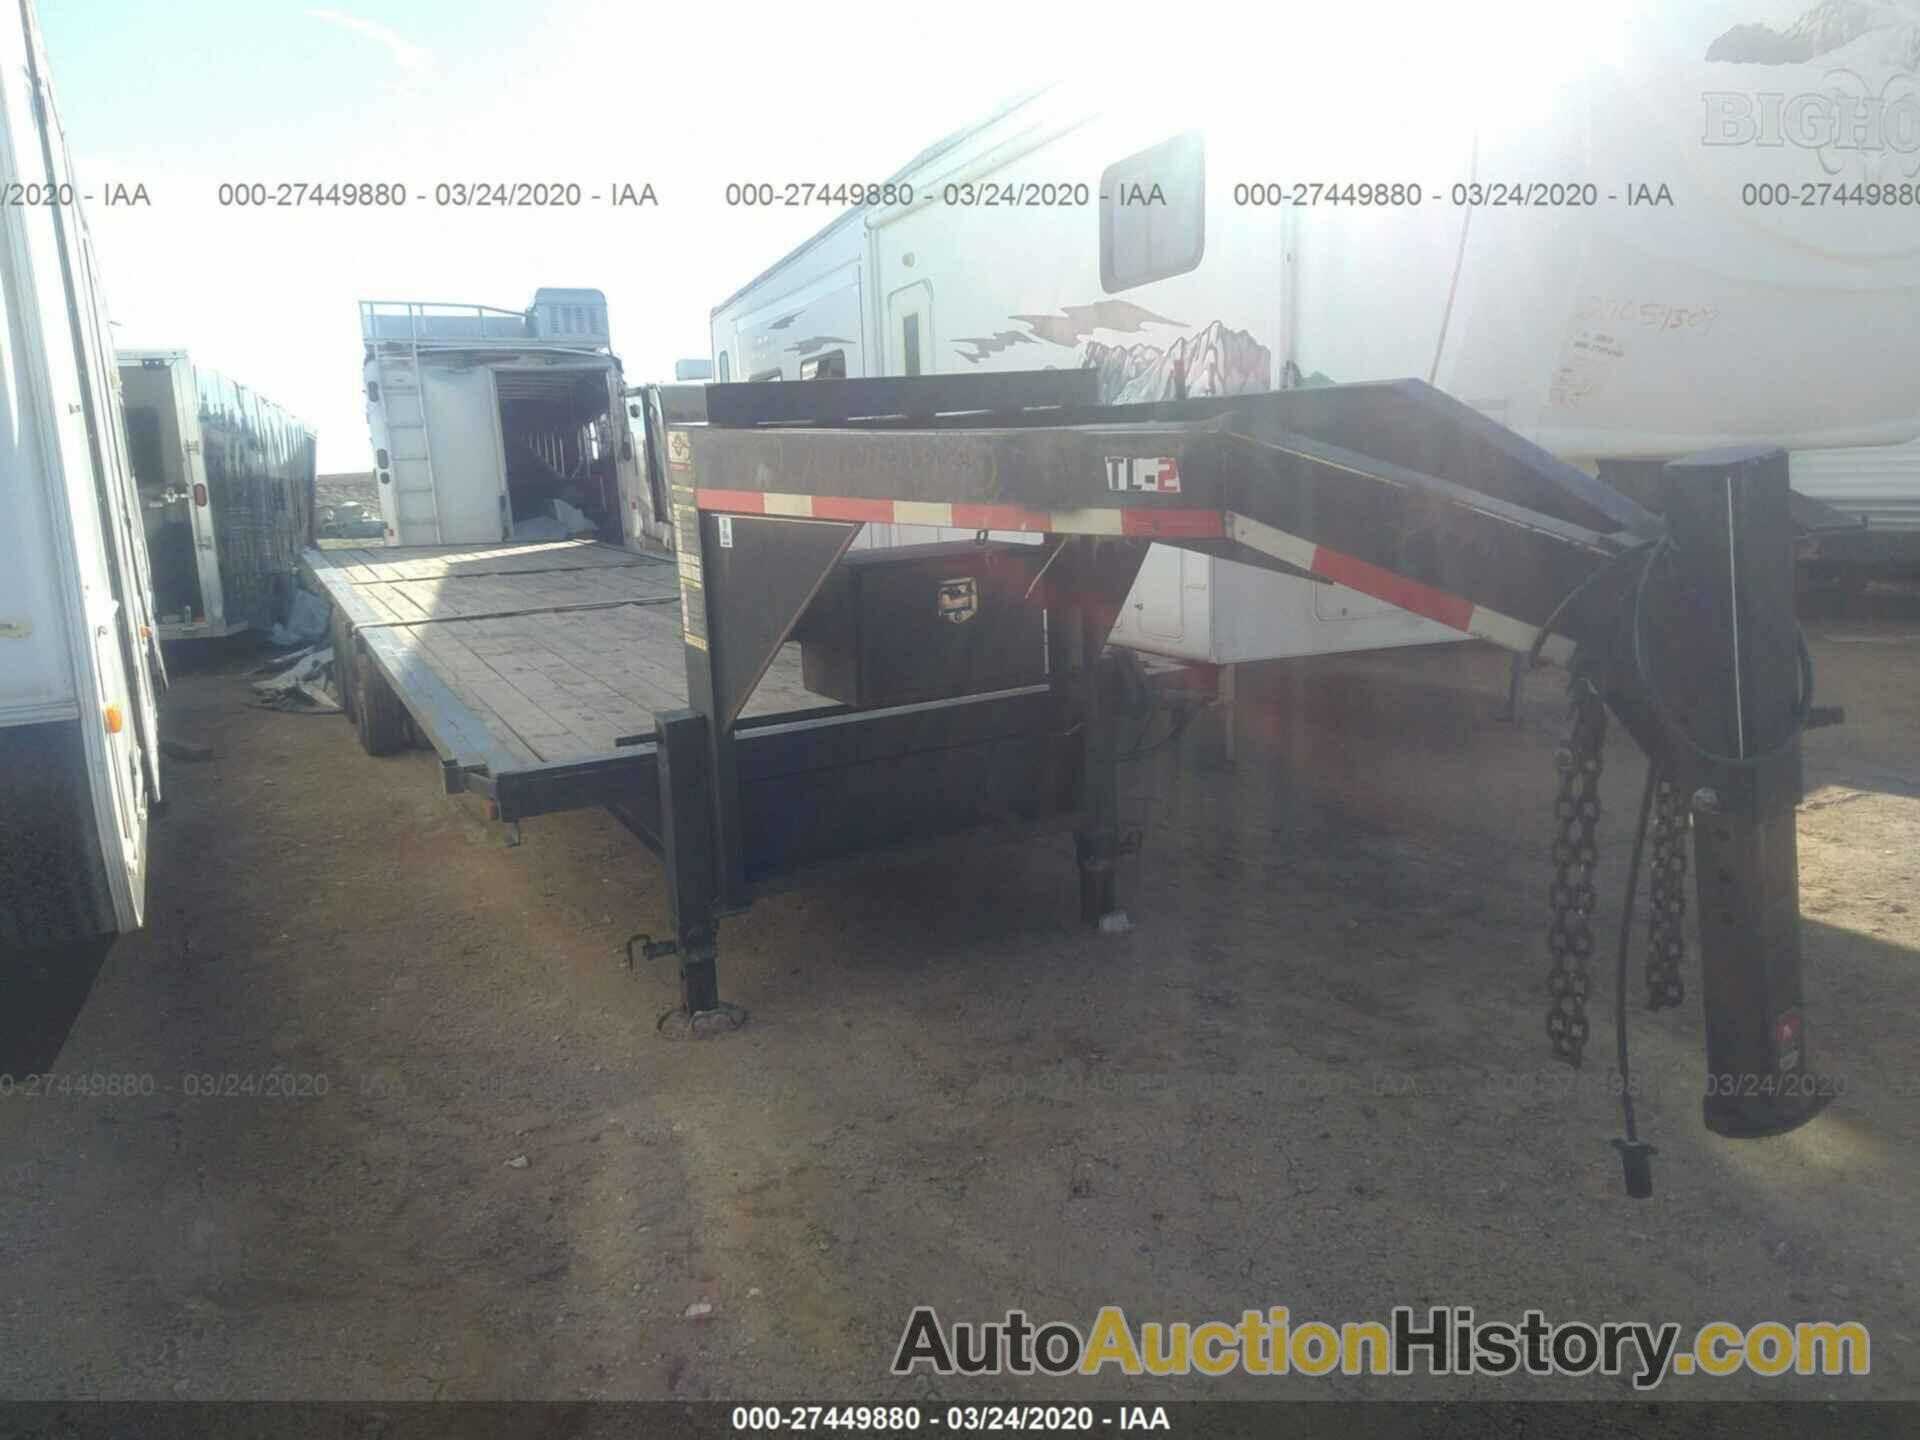 CARRY ON TRAILER, 4YMGN32276G042968